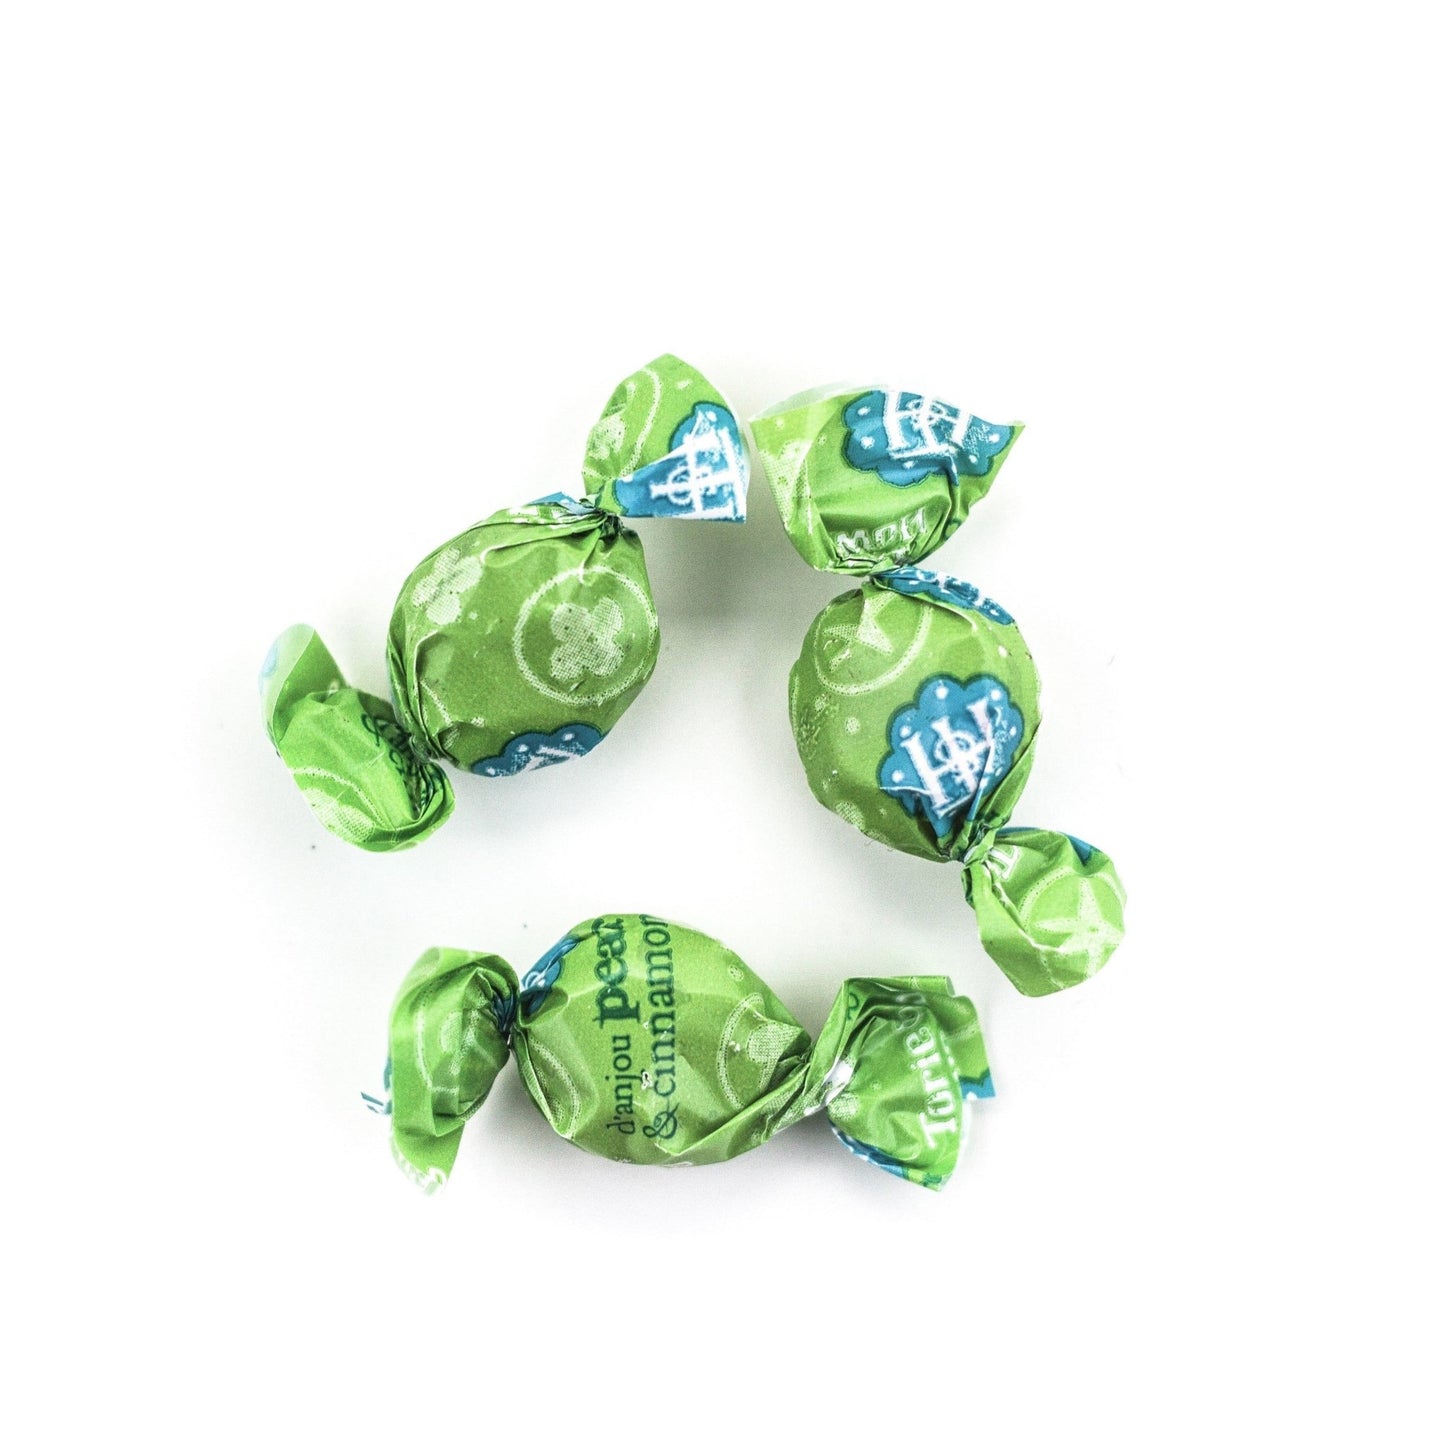 Individually Wrapped D'Anjou Pear & Cinnamon Organic Hard Candy pieces